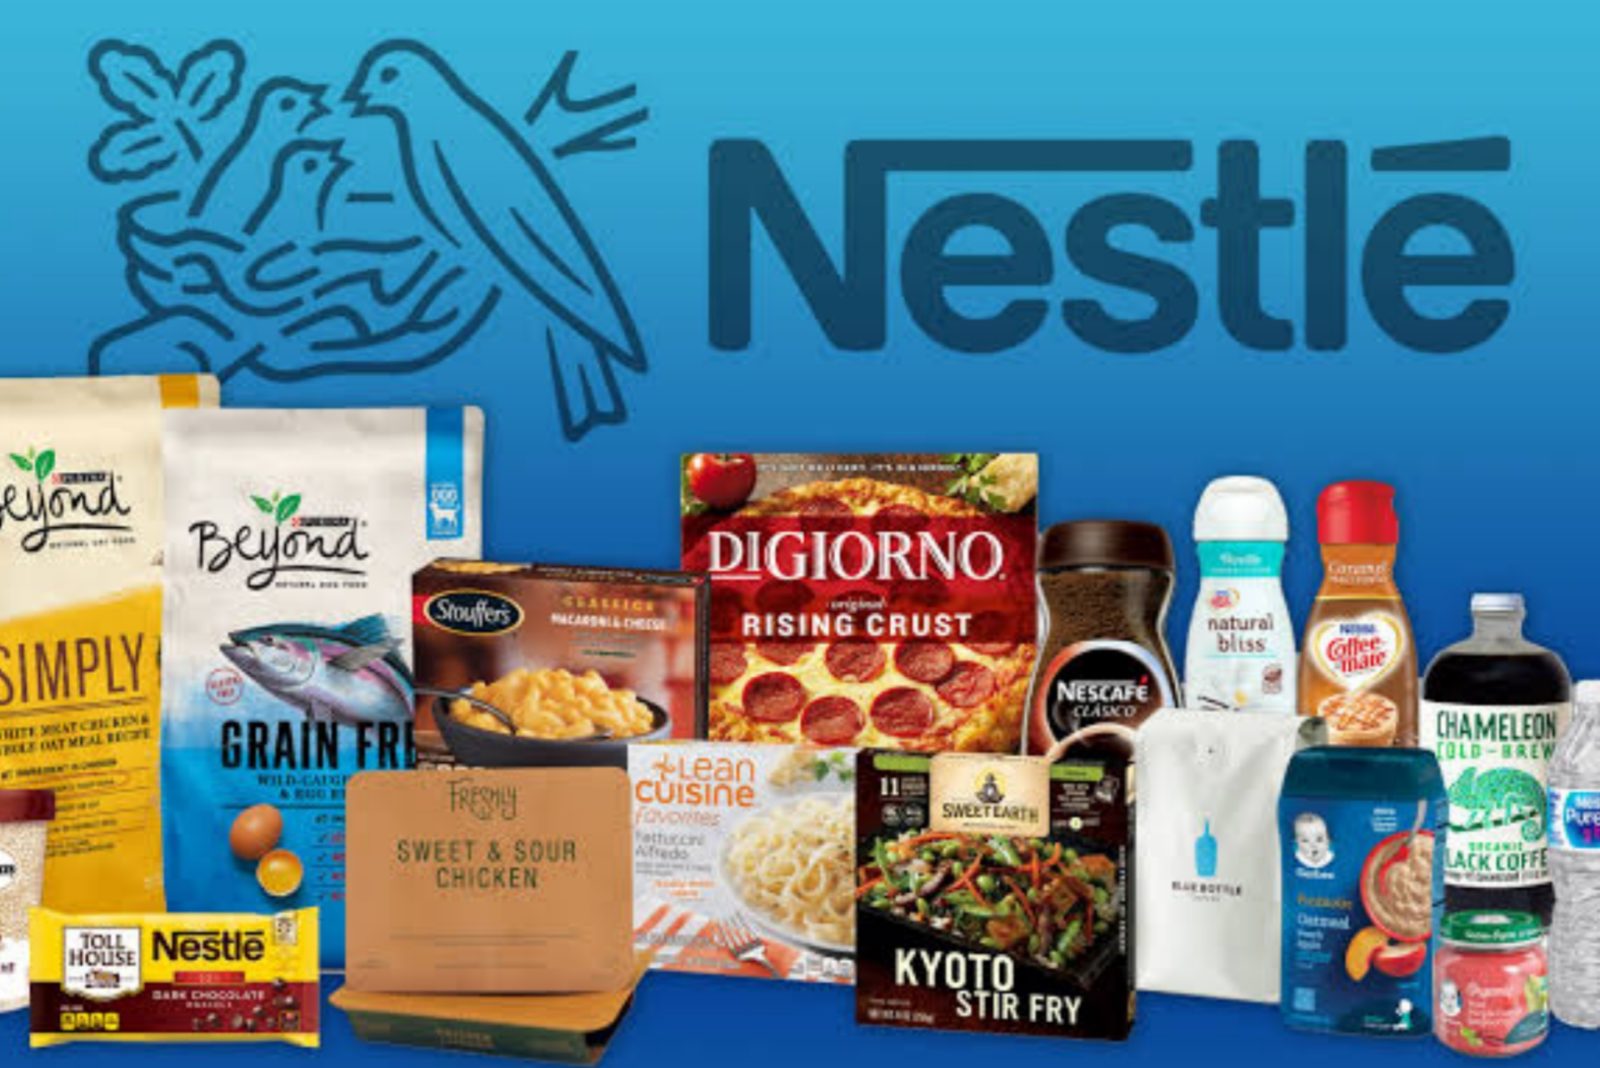 Nestle's 70 Of Foods and Beverages Unhealthy, Says Financial Times UK